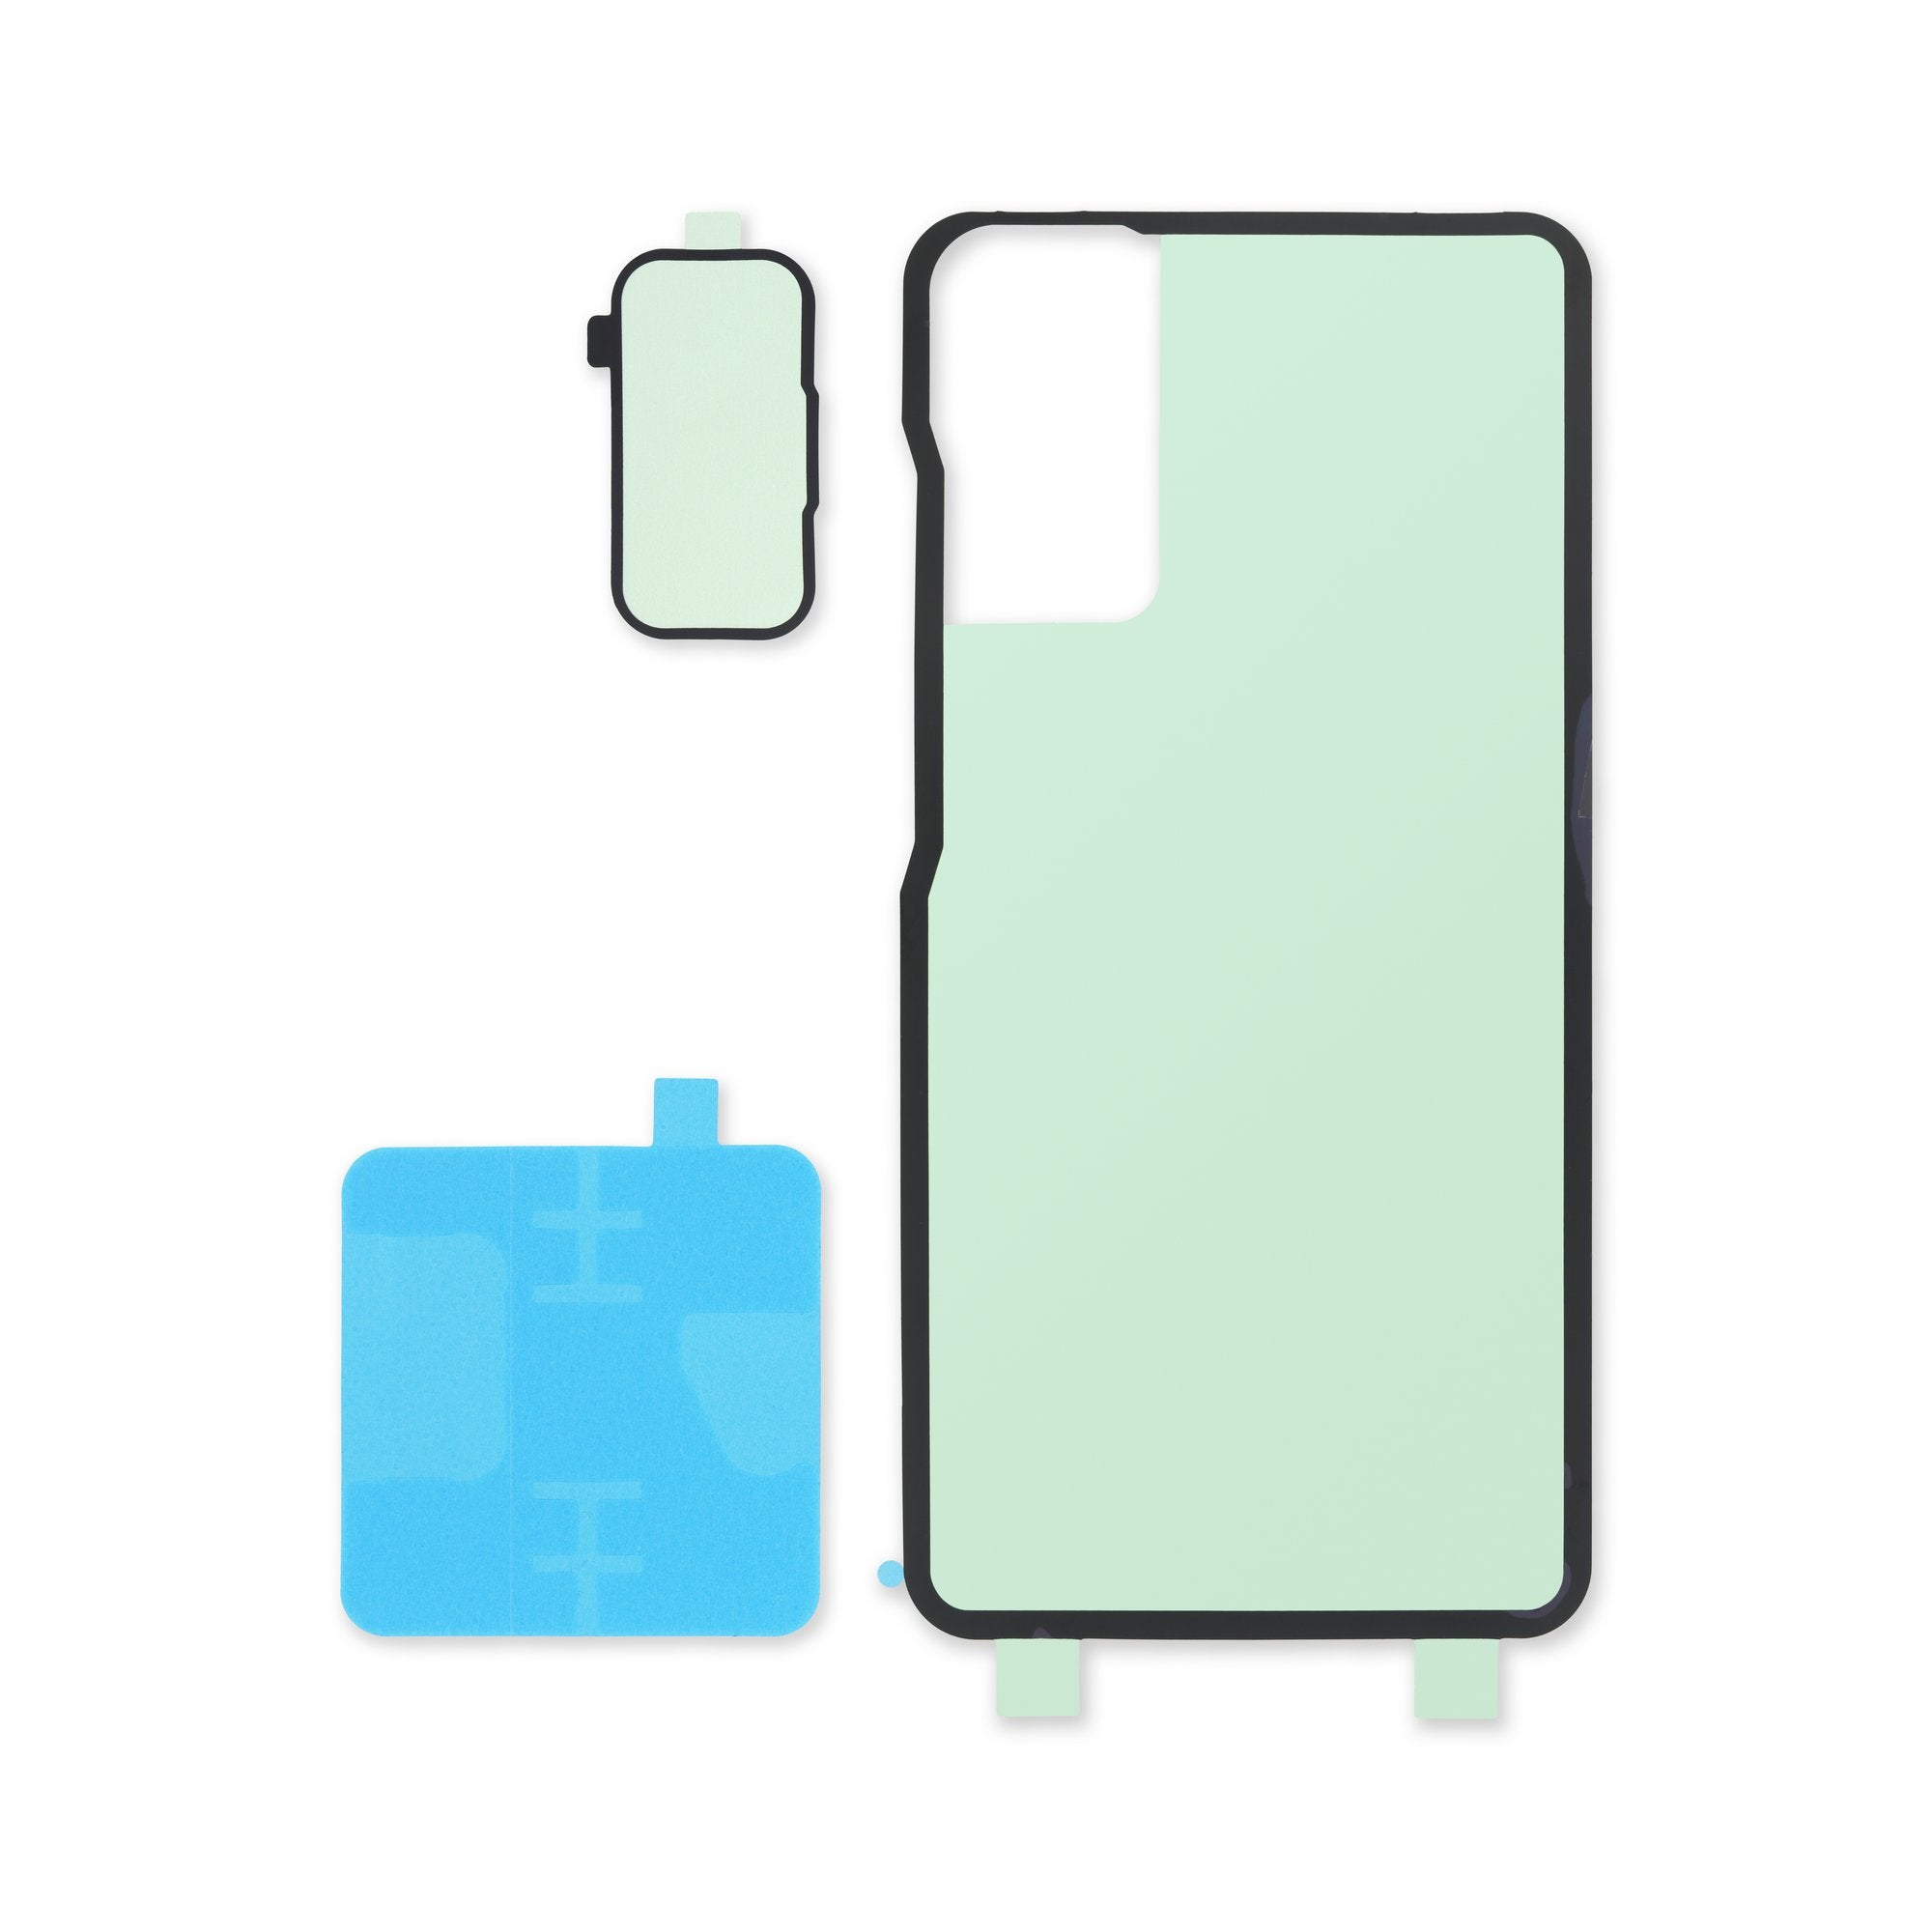 Galaxy S20 FE Rear Cover Adhesive